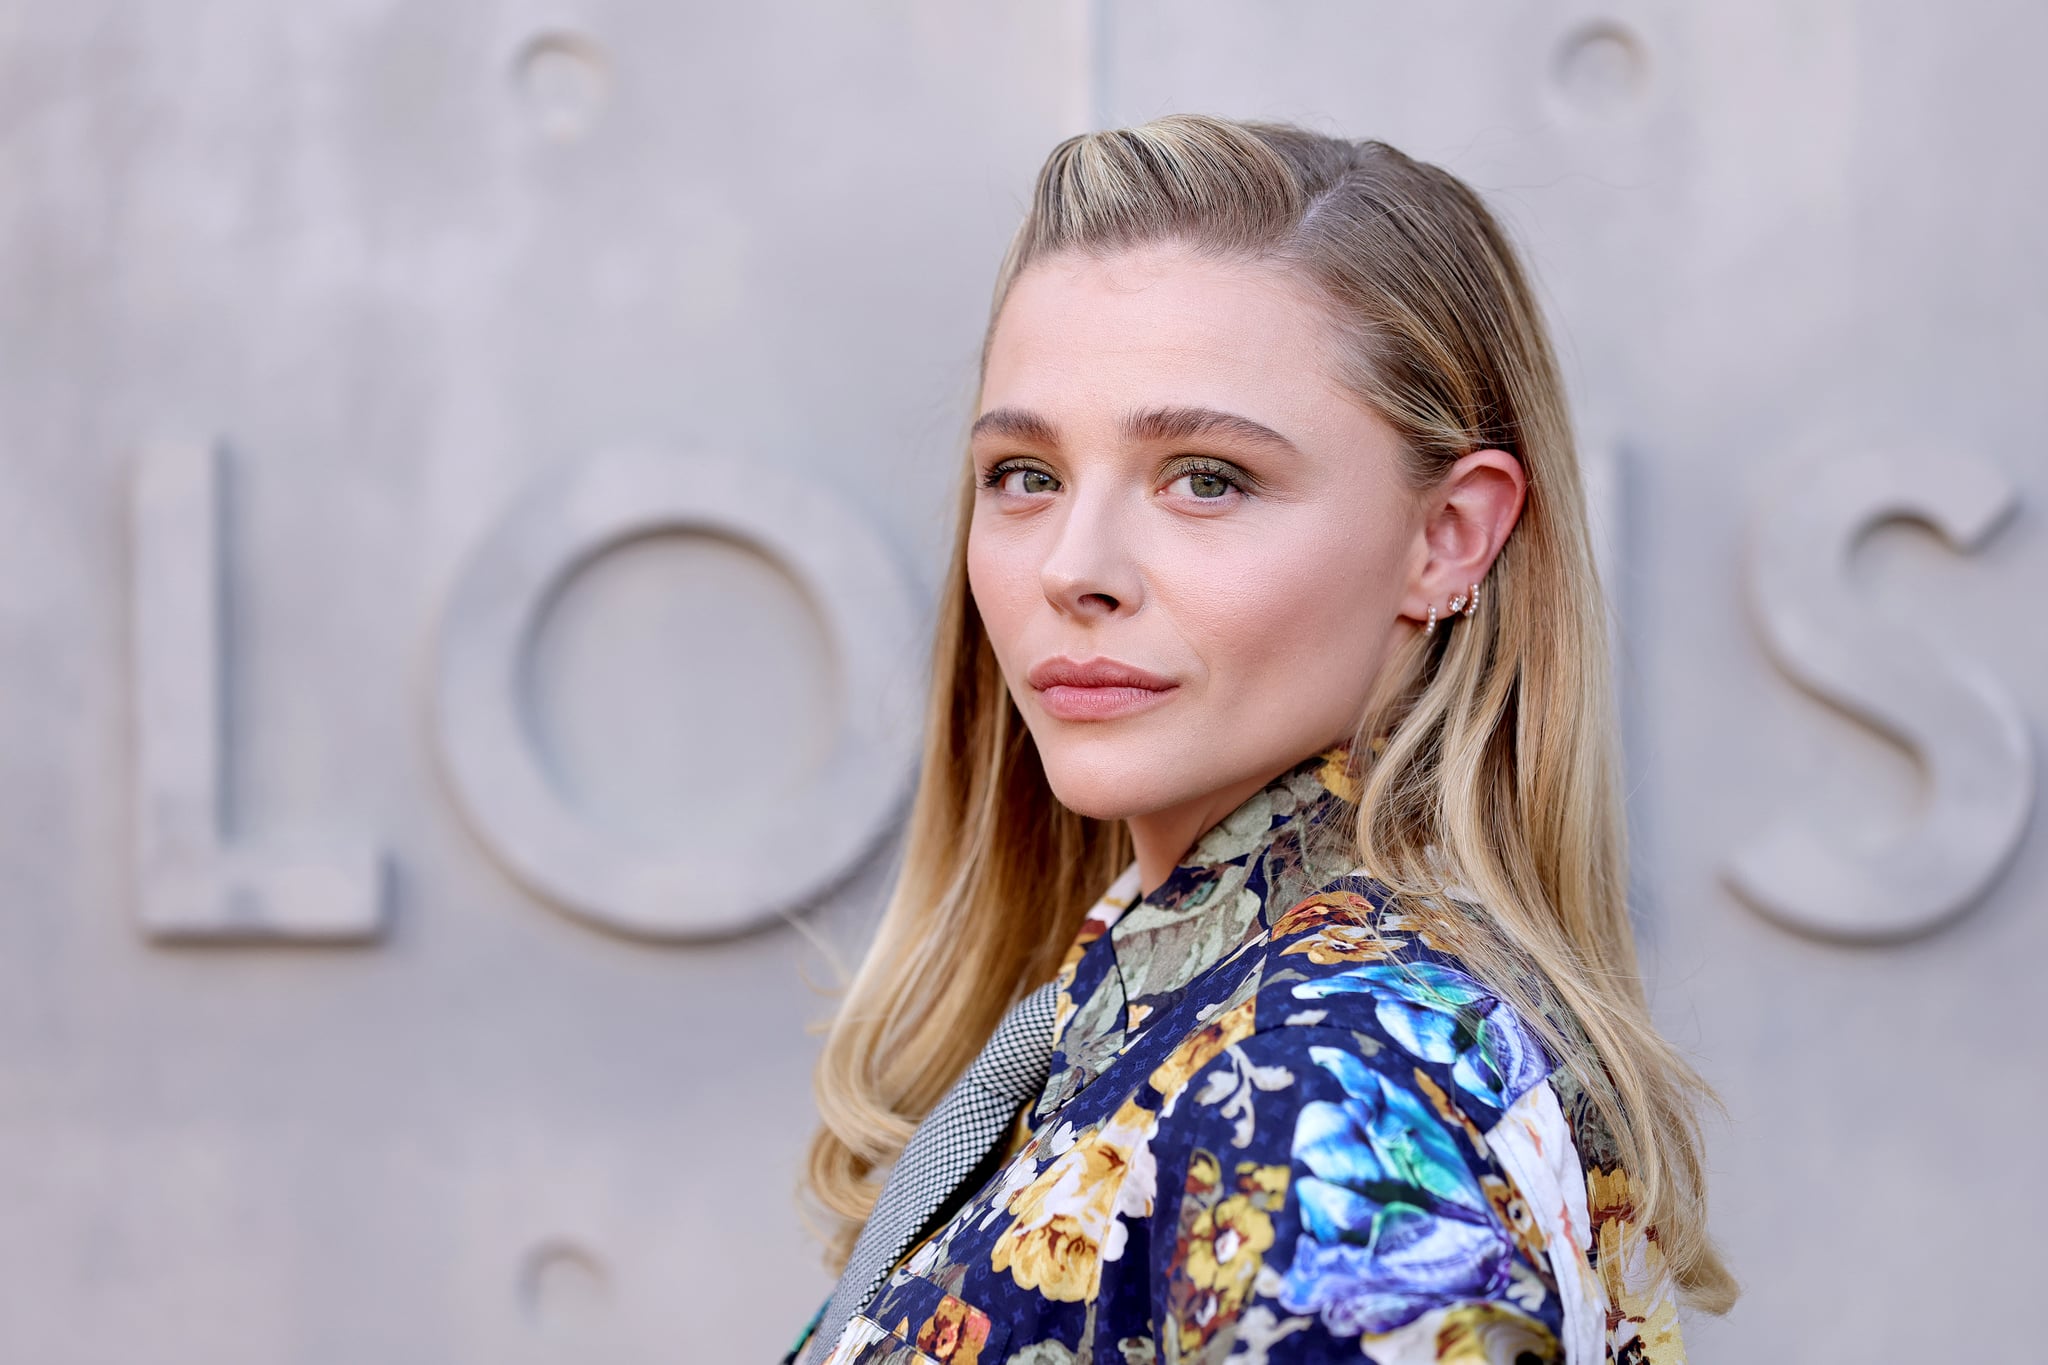 SAN DIEGO, CALIFORNIA - MAY 12: Chloë Grace Moretz attends the Louis Vuitton's 2023 Cruise Show on May 12, 2022 in San Diego, California. (Photo by Emma McIntyre/Getty Images)